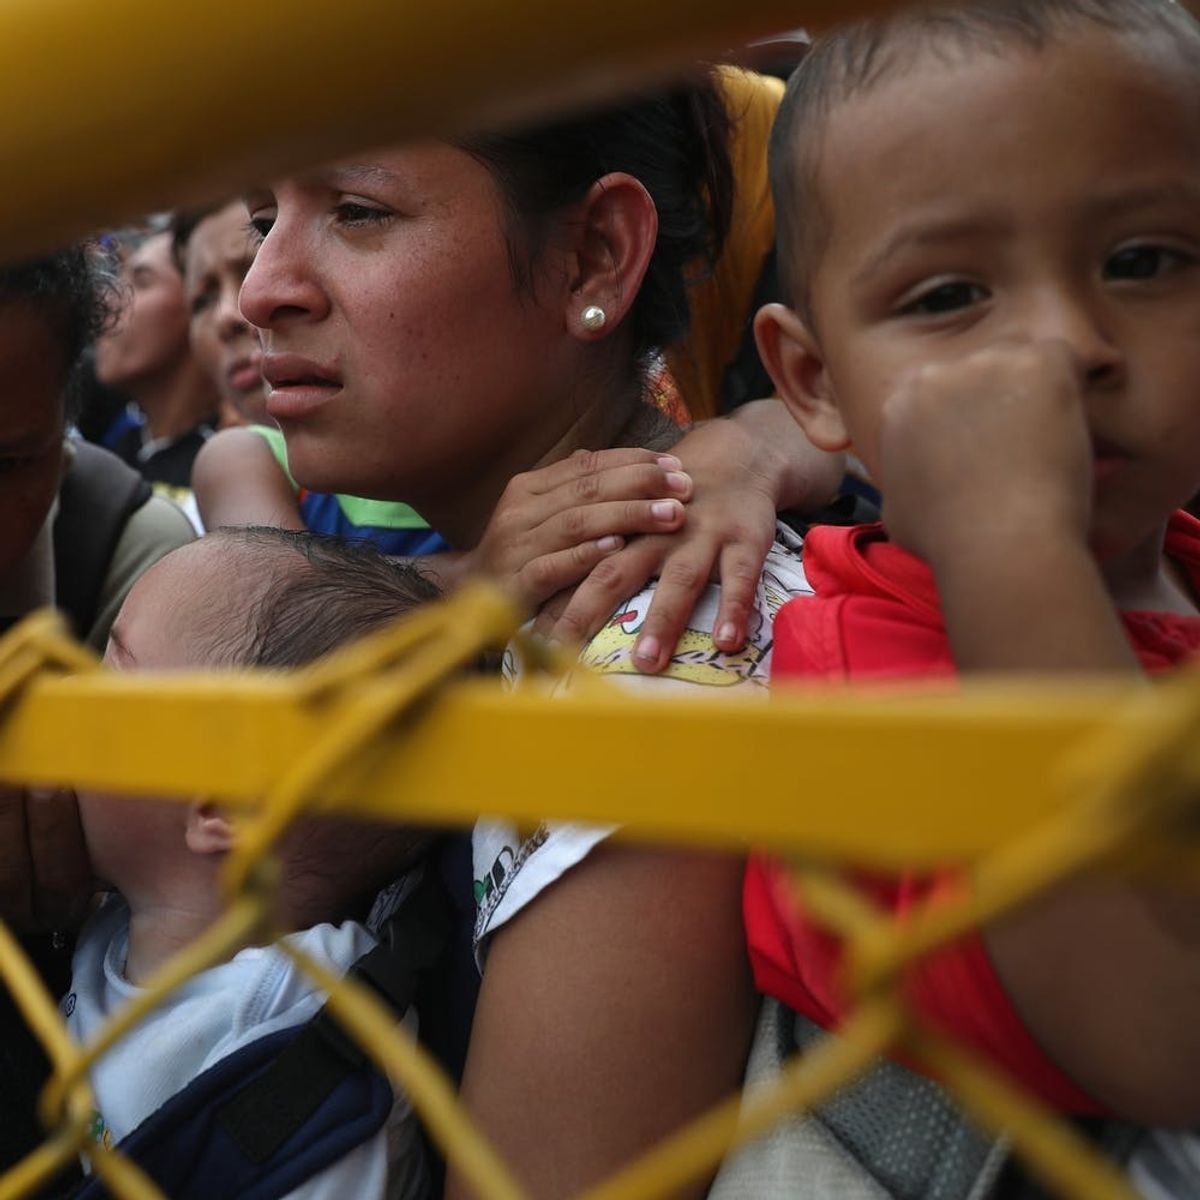 The US Government Is Still Breaking Up Families at the Border, But Not Without a Fight